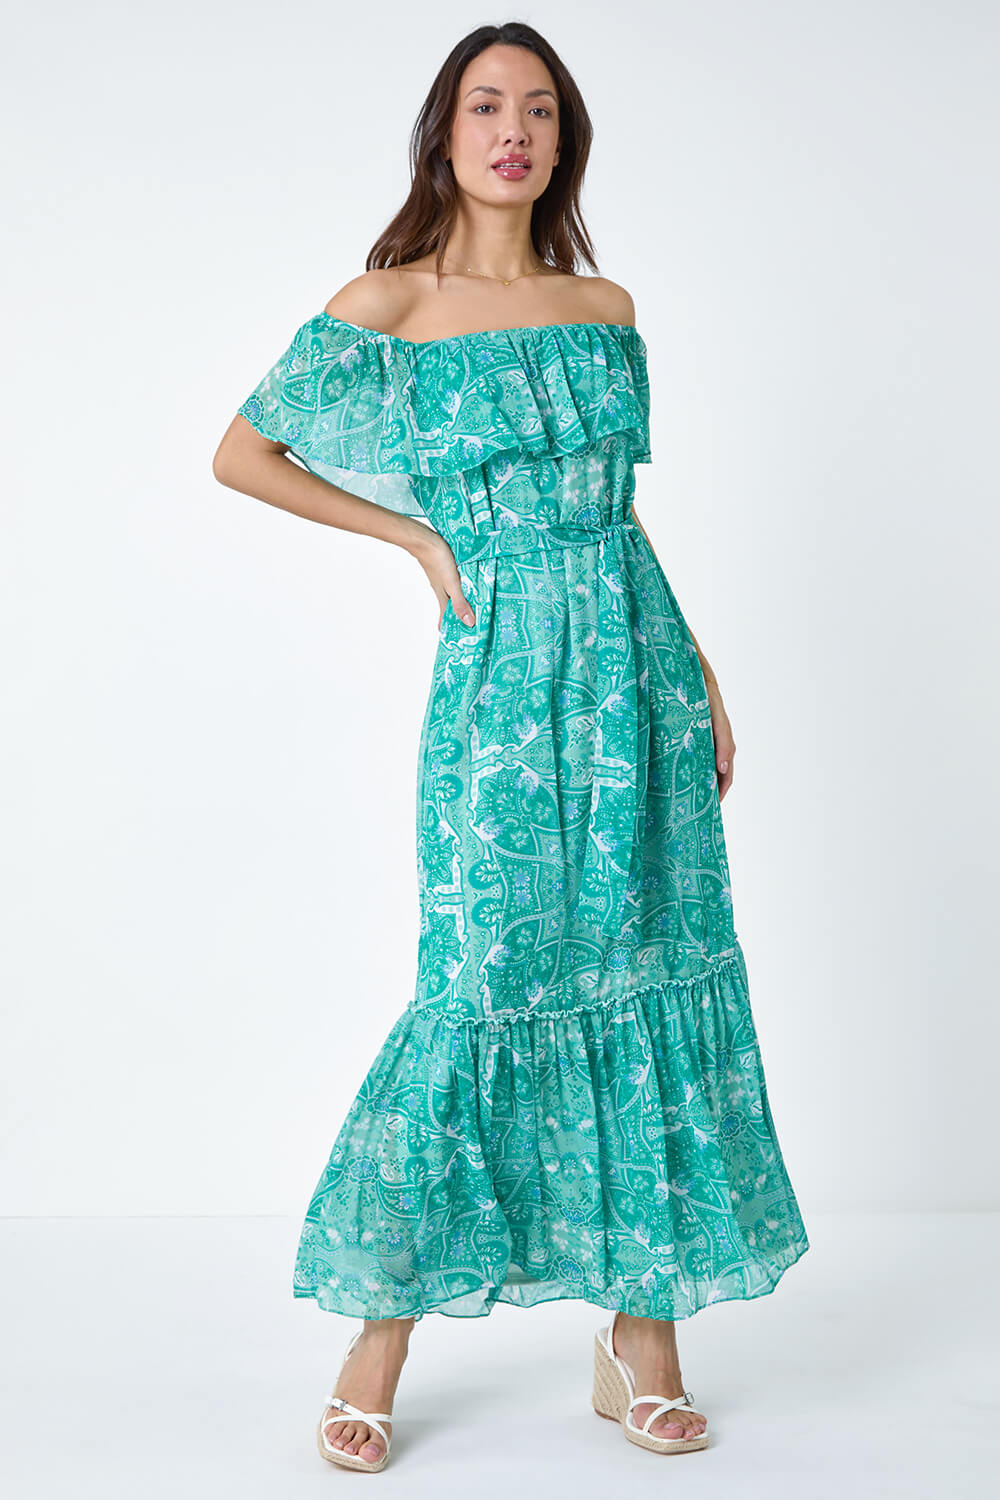 Teal Paisley Print Tiered Maxi Dress, Image 2 of 5